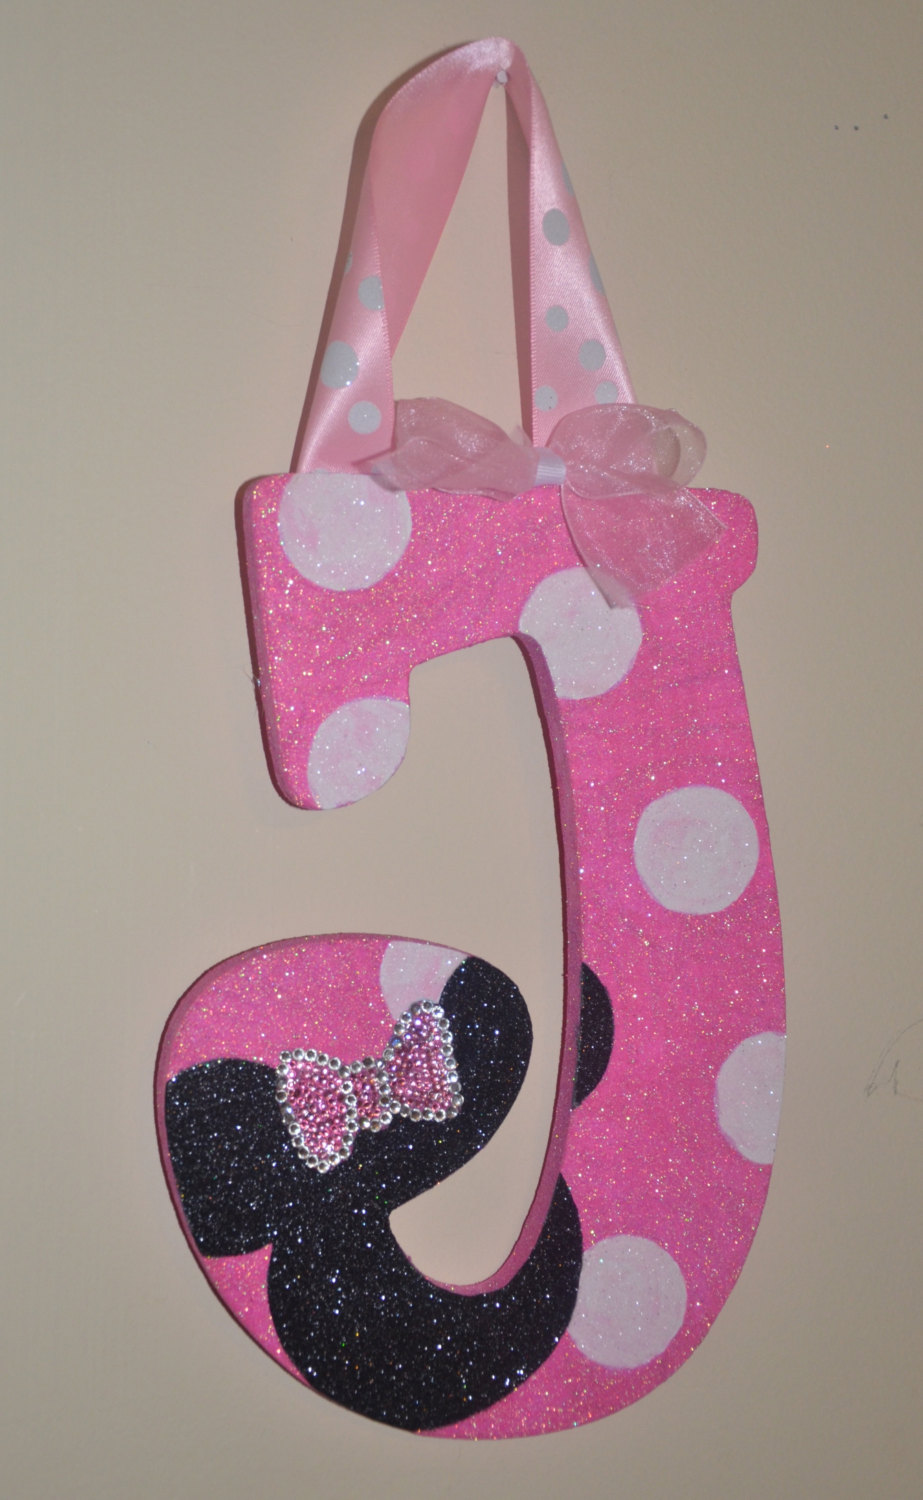 Glitter Pink/white Polka Dot Minnie Mouse Inspired Decorative Wall Letters (wood), Nursery Decor, Baby Shower Gift